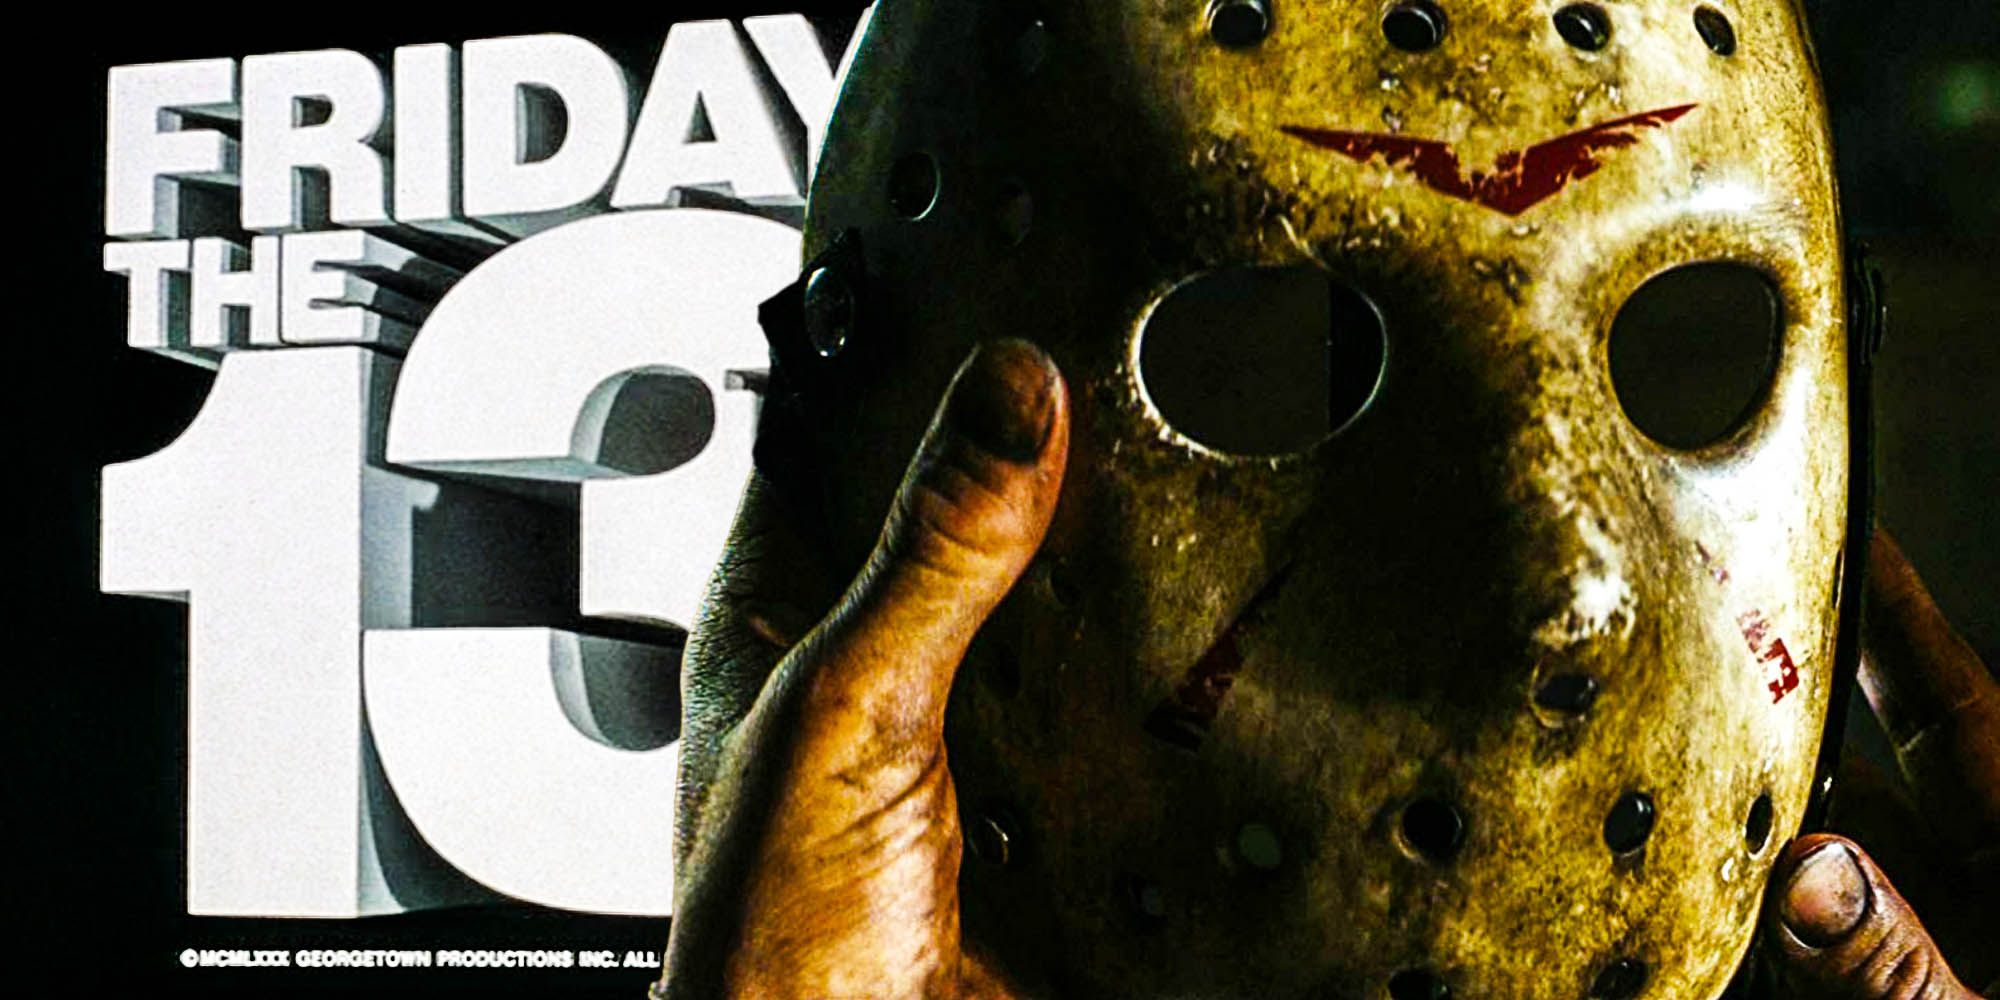 what the Friday the 13th jason lawsuit mean for hollywood